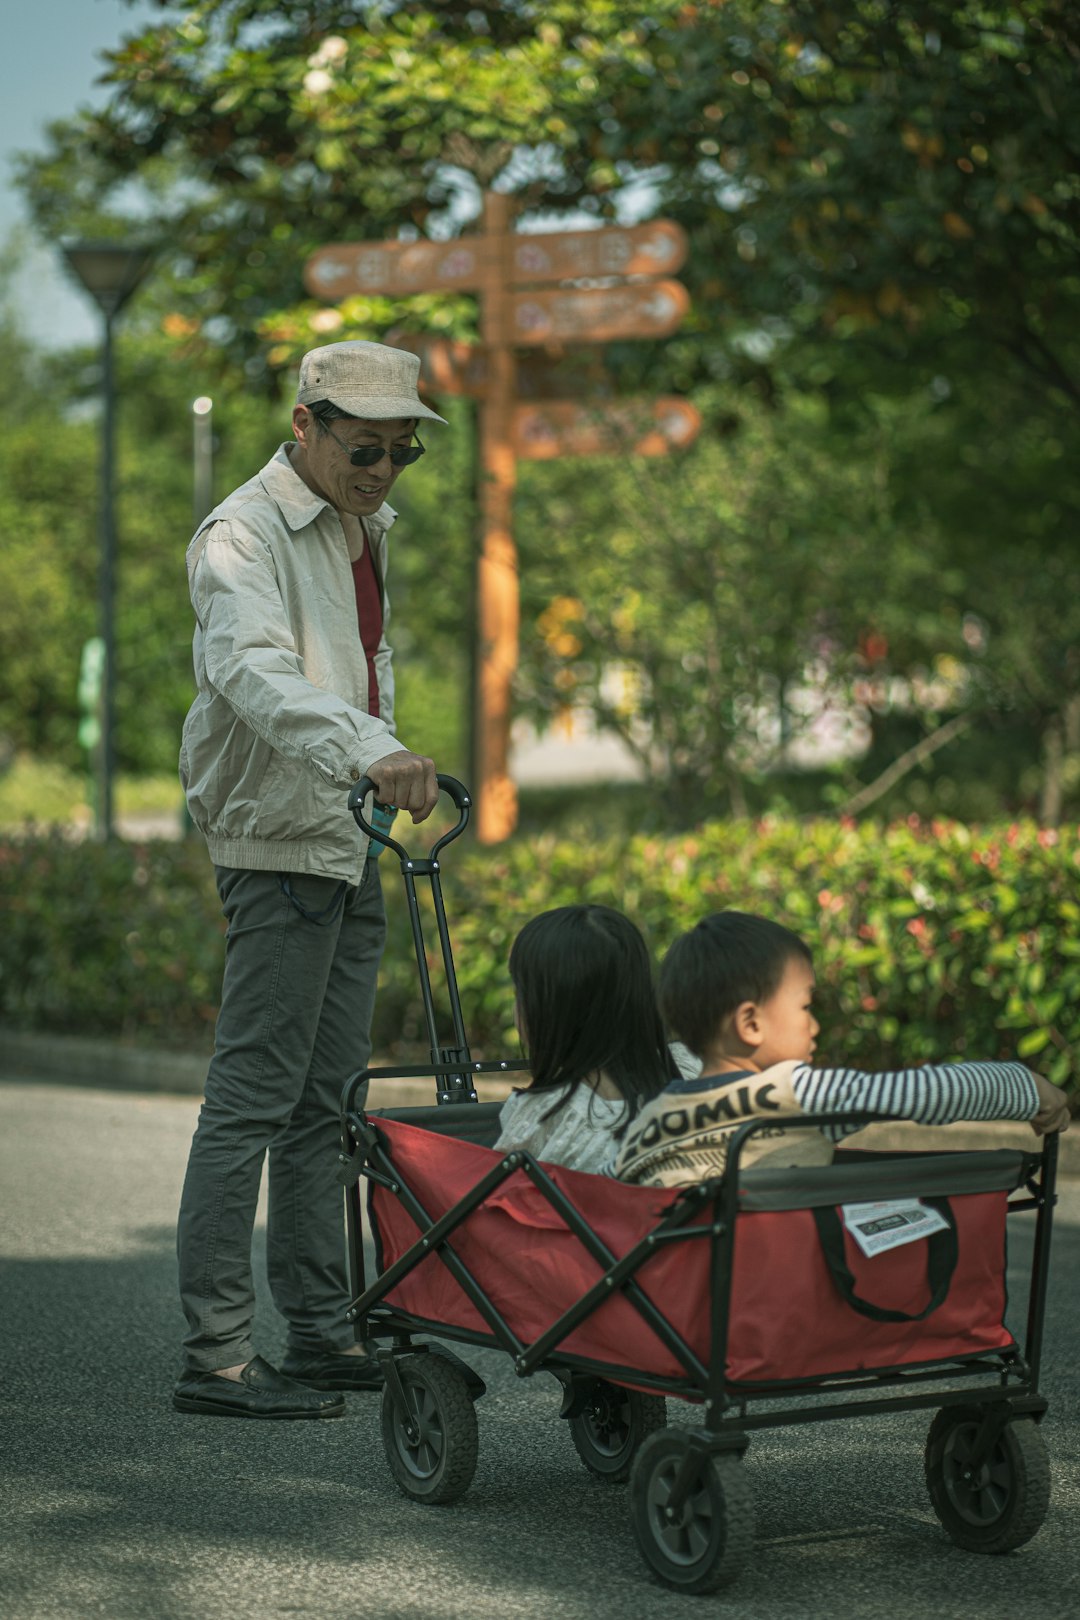 man in white dress shirt and brown hat sitting on red and black stroller during daytime